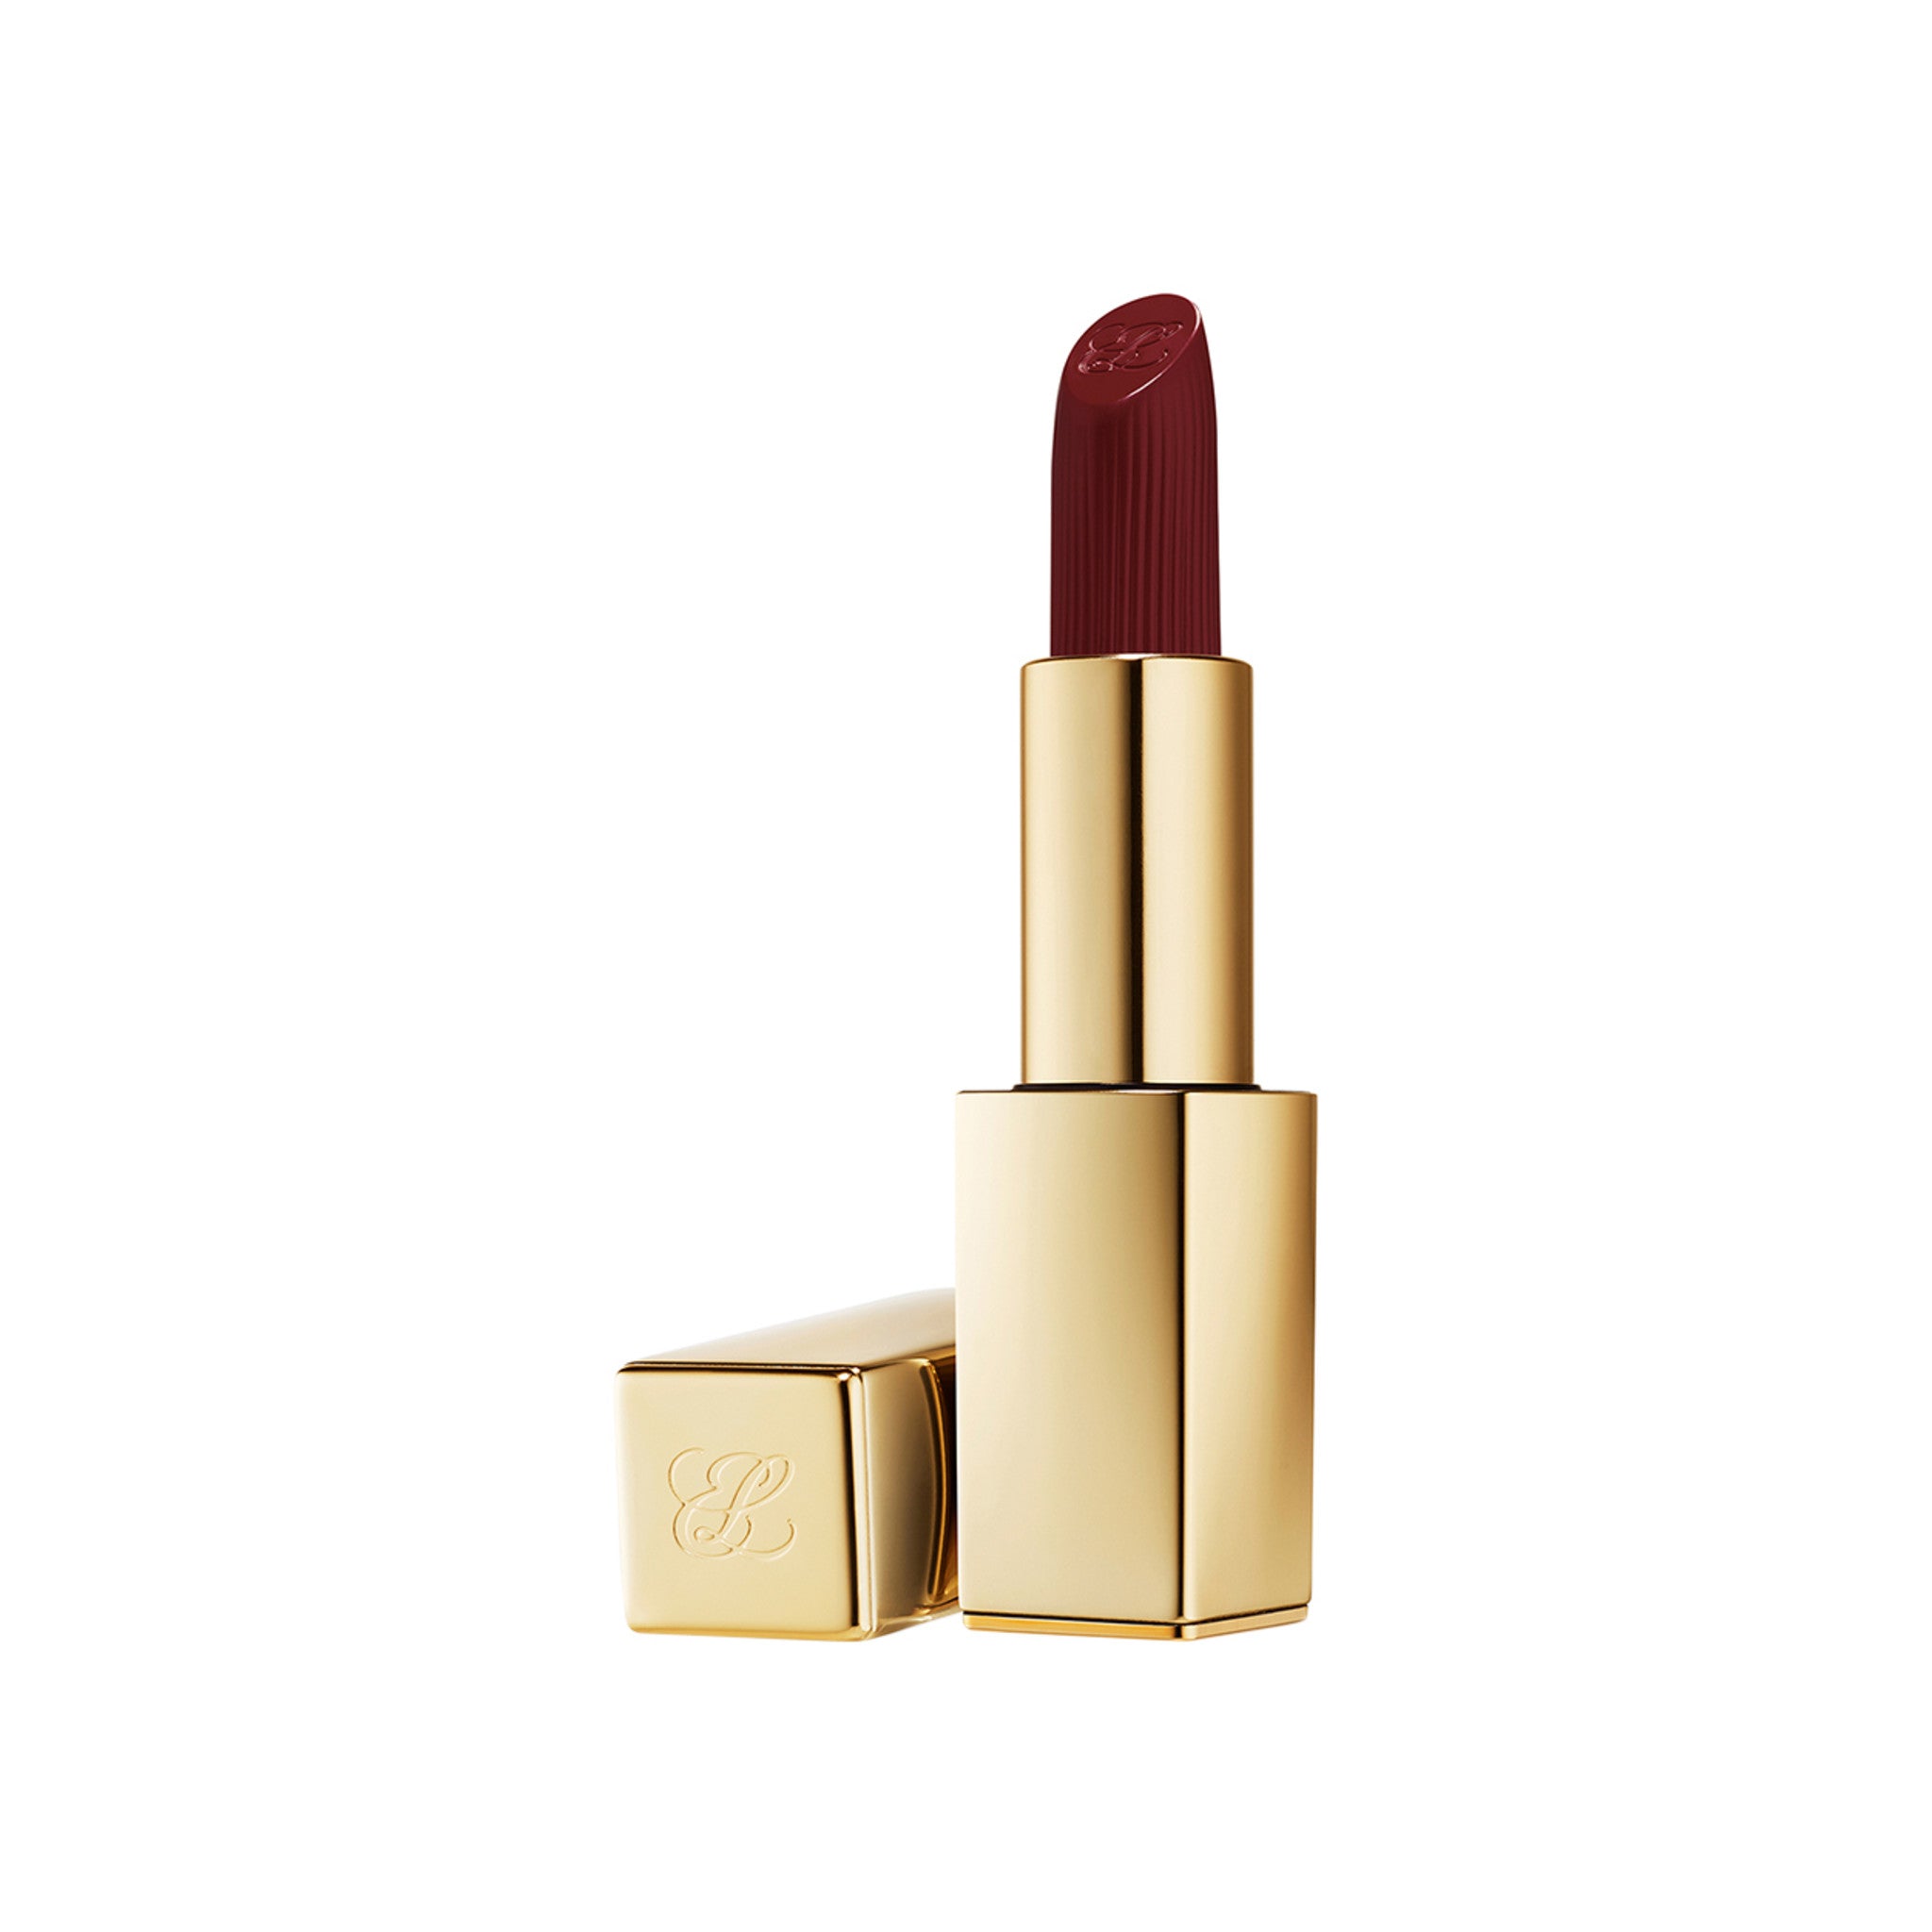 Estée Lauder Pure Color Lipstick Matte Color/Shade variant: Power Kiss. This product is in the color pink